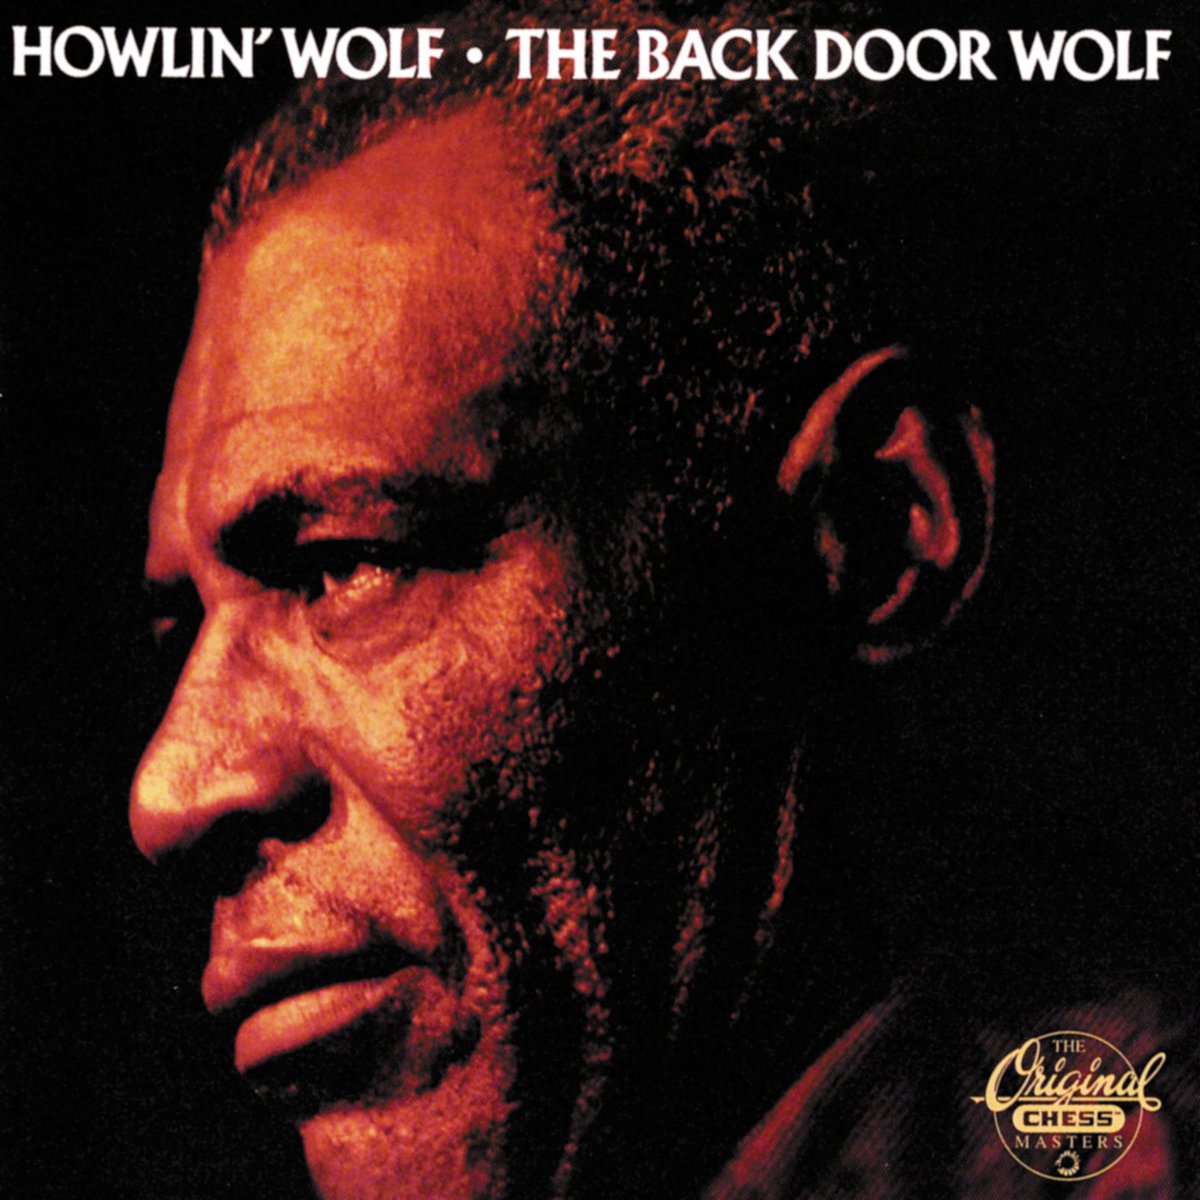 Howlin' Wolf - The Back Door Wolf, 1973  

Is the final album by Howlin' Wolf.  It was recorded with musicians who regularly backed him on stage, including Hubert Sumlin, Detroit Junior, Andrew McMahon, Chico Chism, Lafayette 'Shorty' Gilbert and the bandleader Eddie Shaw.